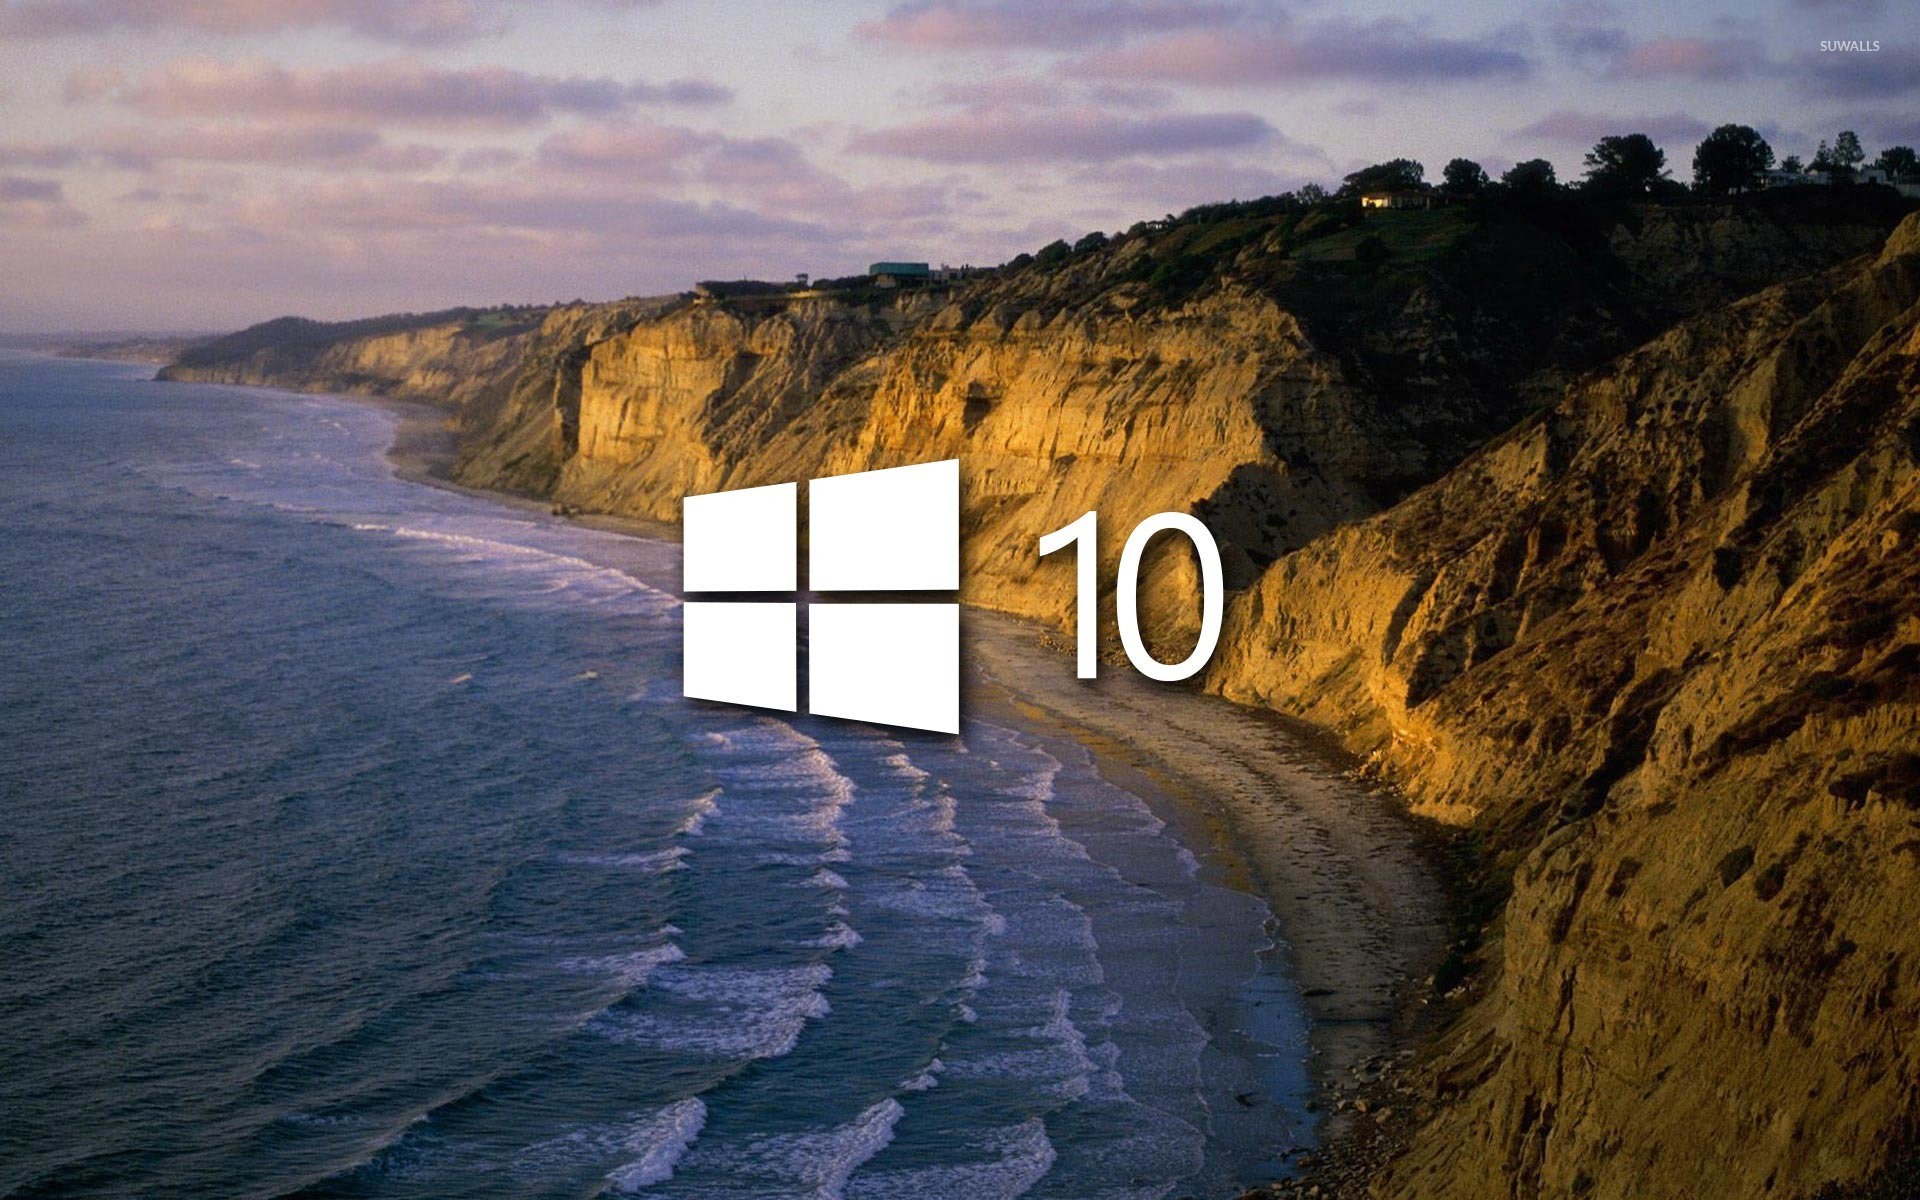 Windows 10 on the shore simple logo wallpaper - Computer wallpapers